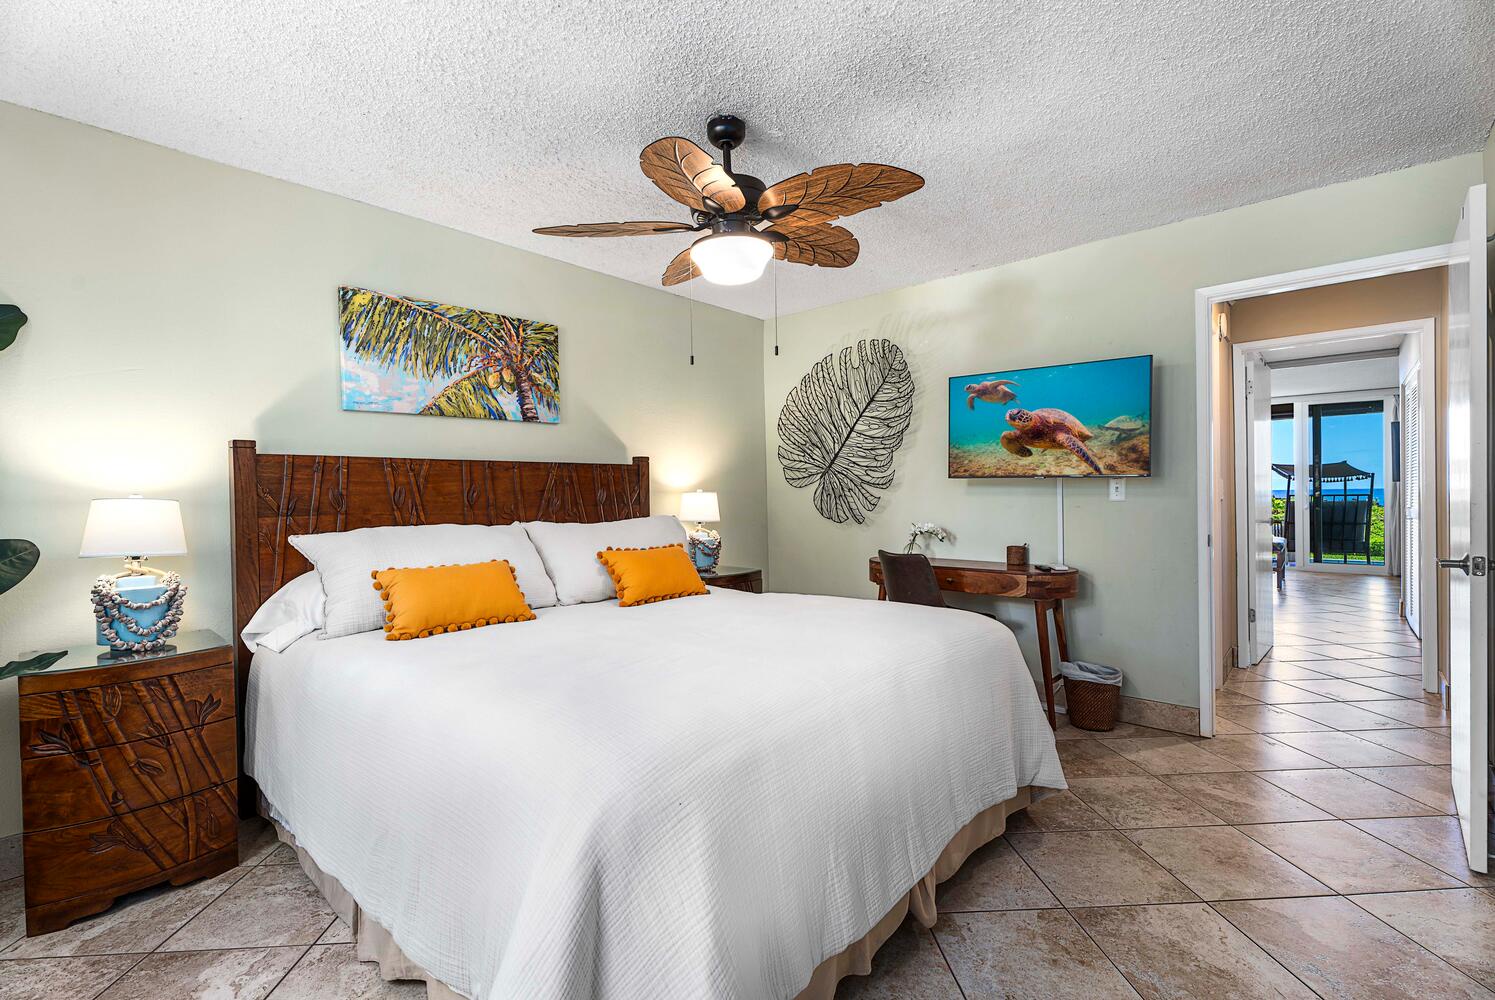 Kailua Kona Vacation Rentals, Keauhou Kona Surf & Racquet 1104 - Tranquil guest suite featuring a plush king bed for ultimate relaxation – your serene retreat after a day of exploration.